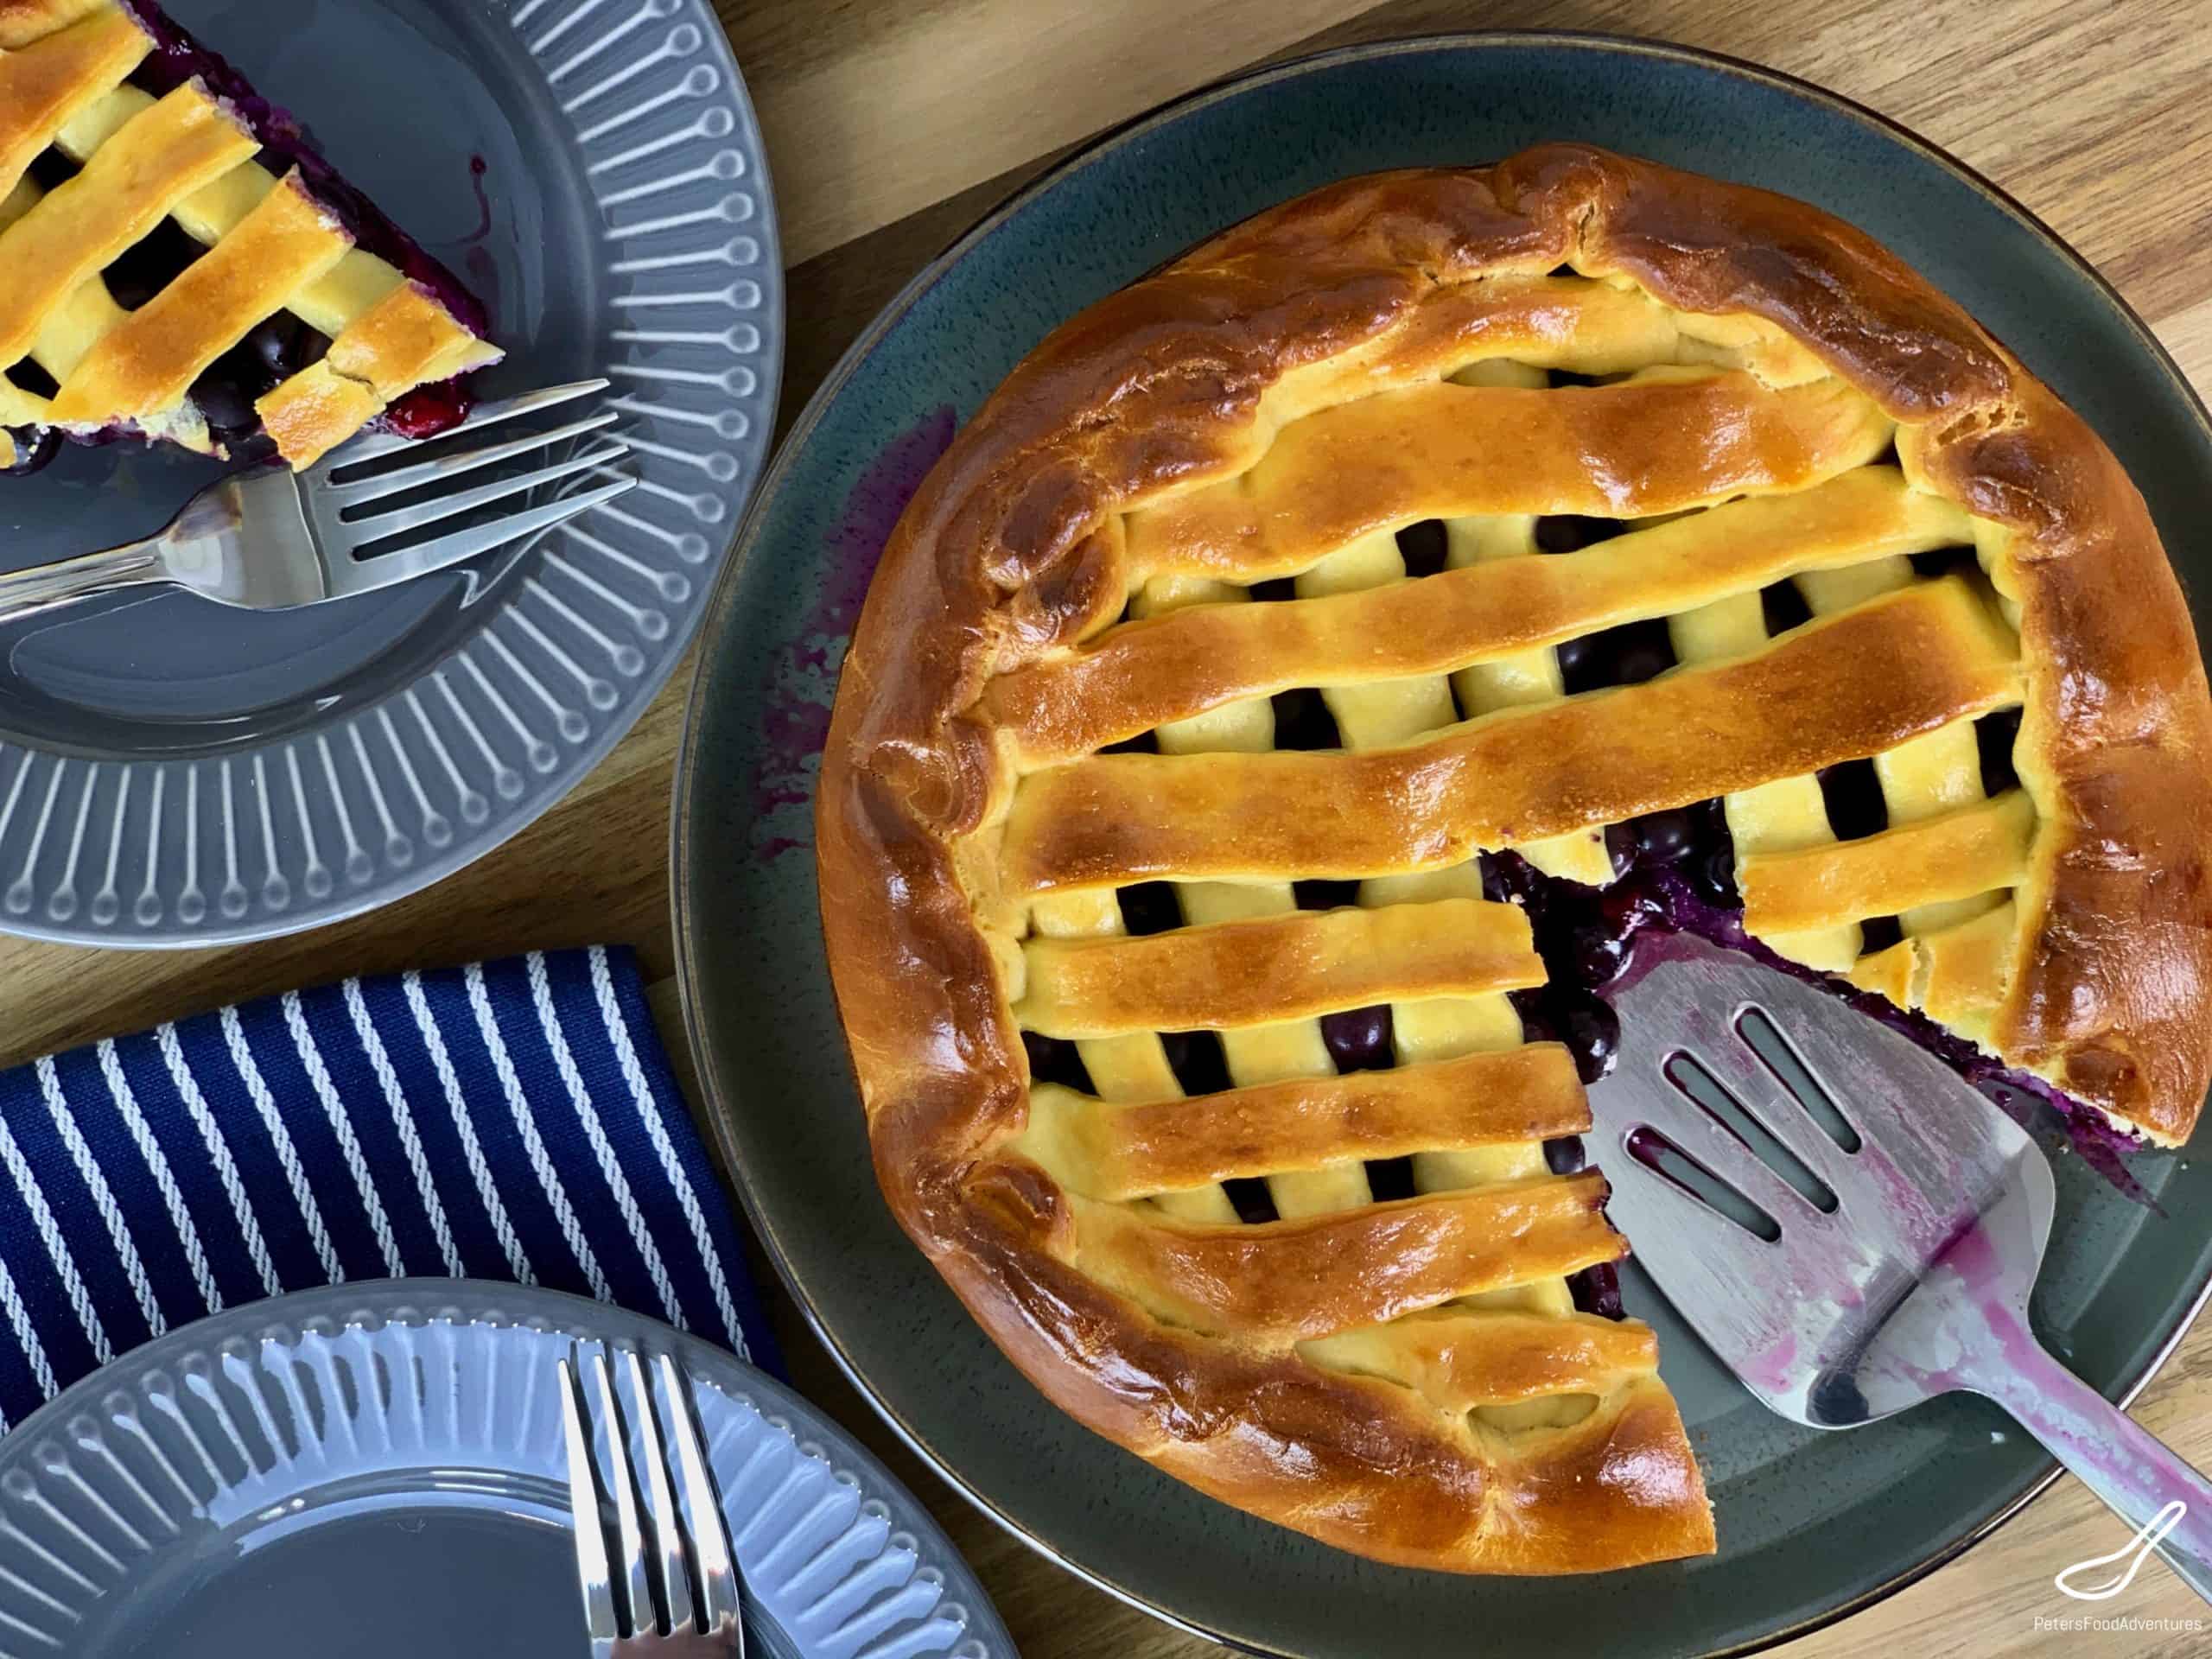 Looking top down on a lattice blueberry pie